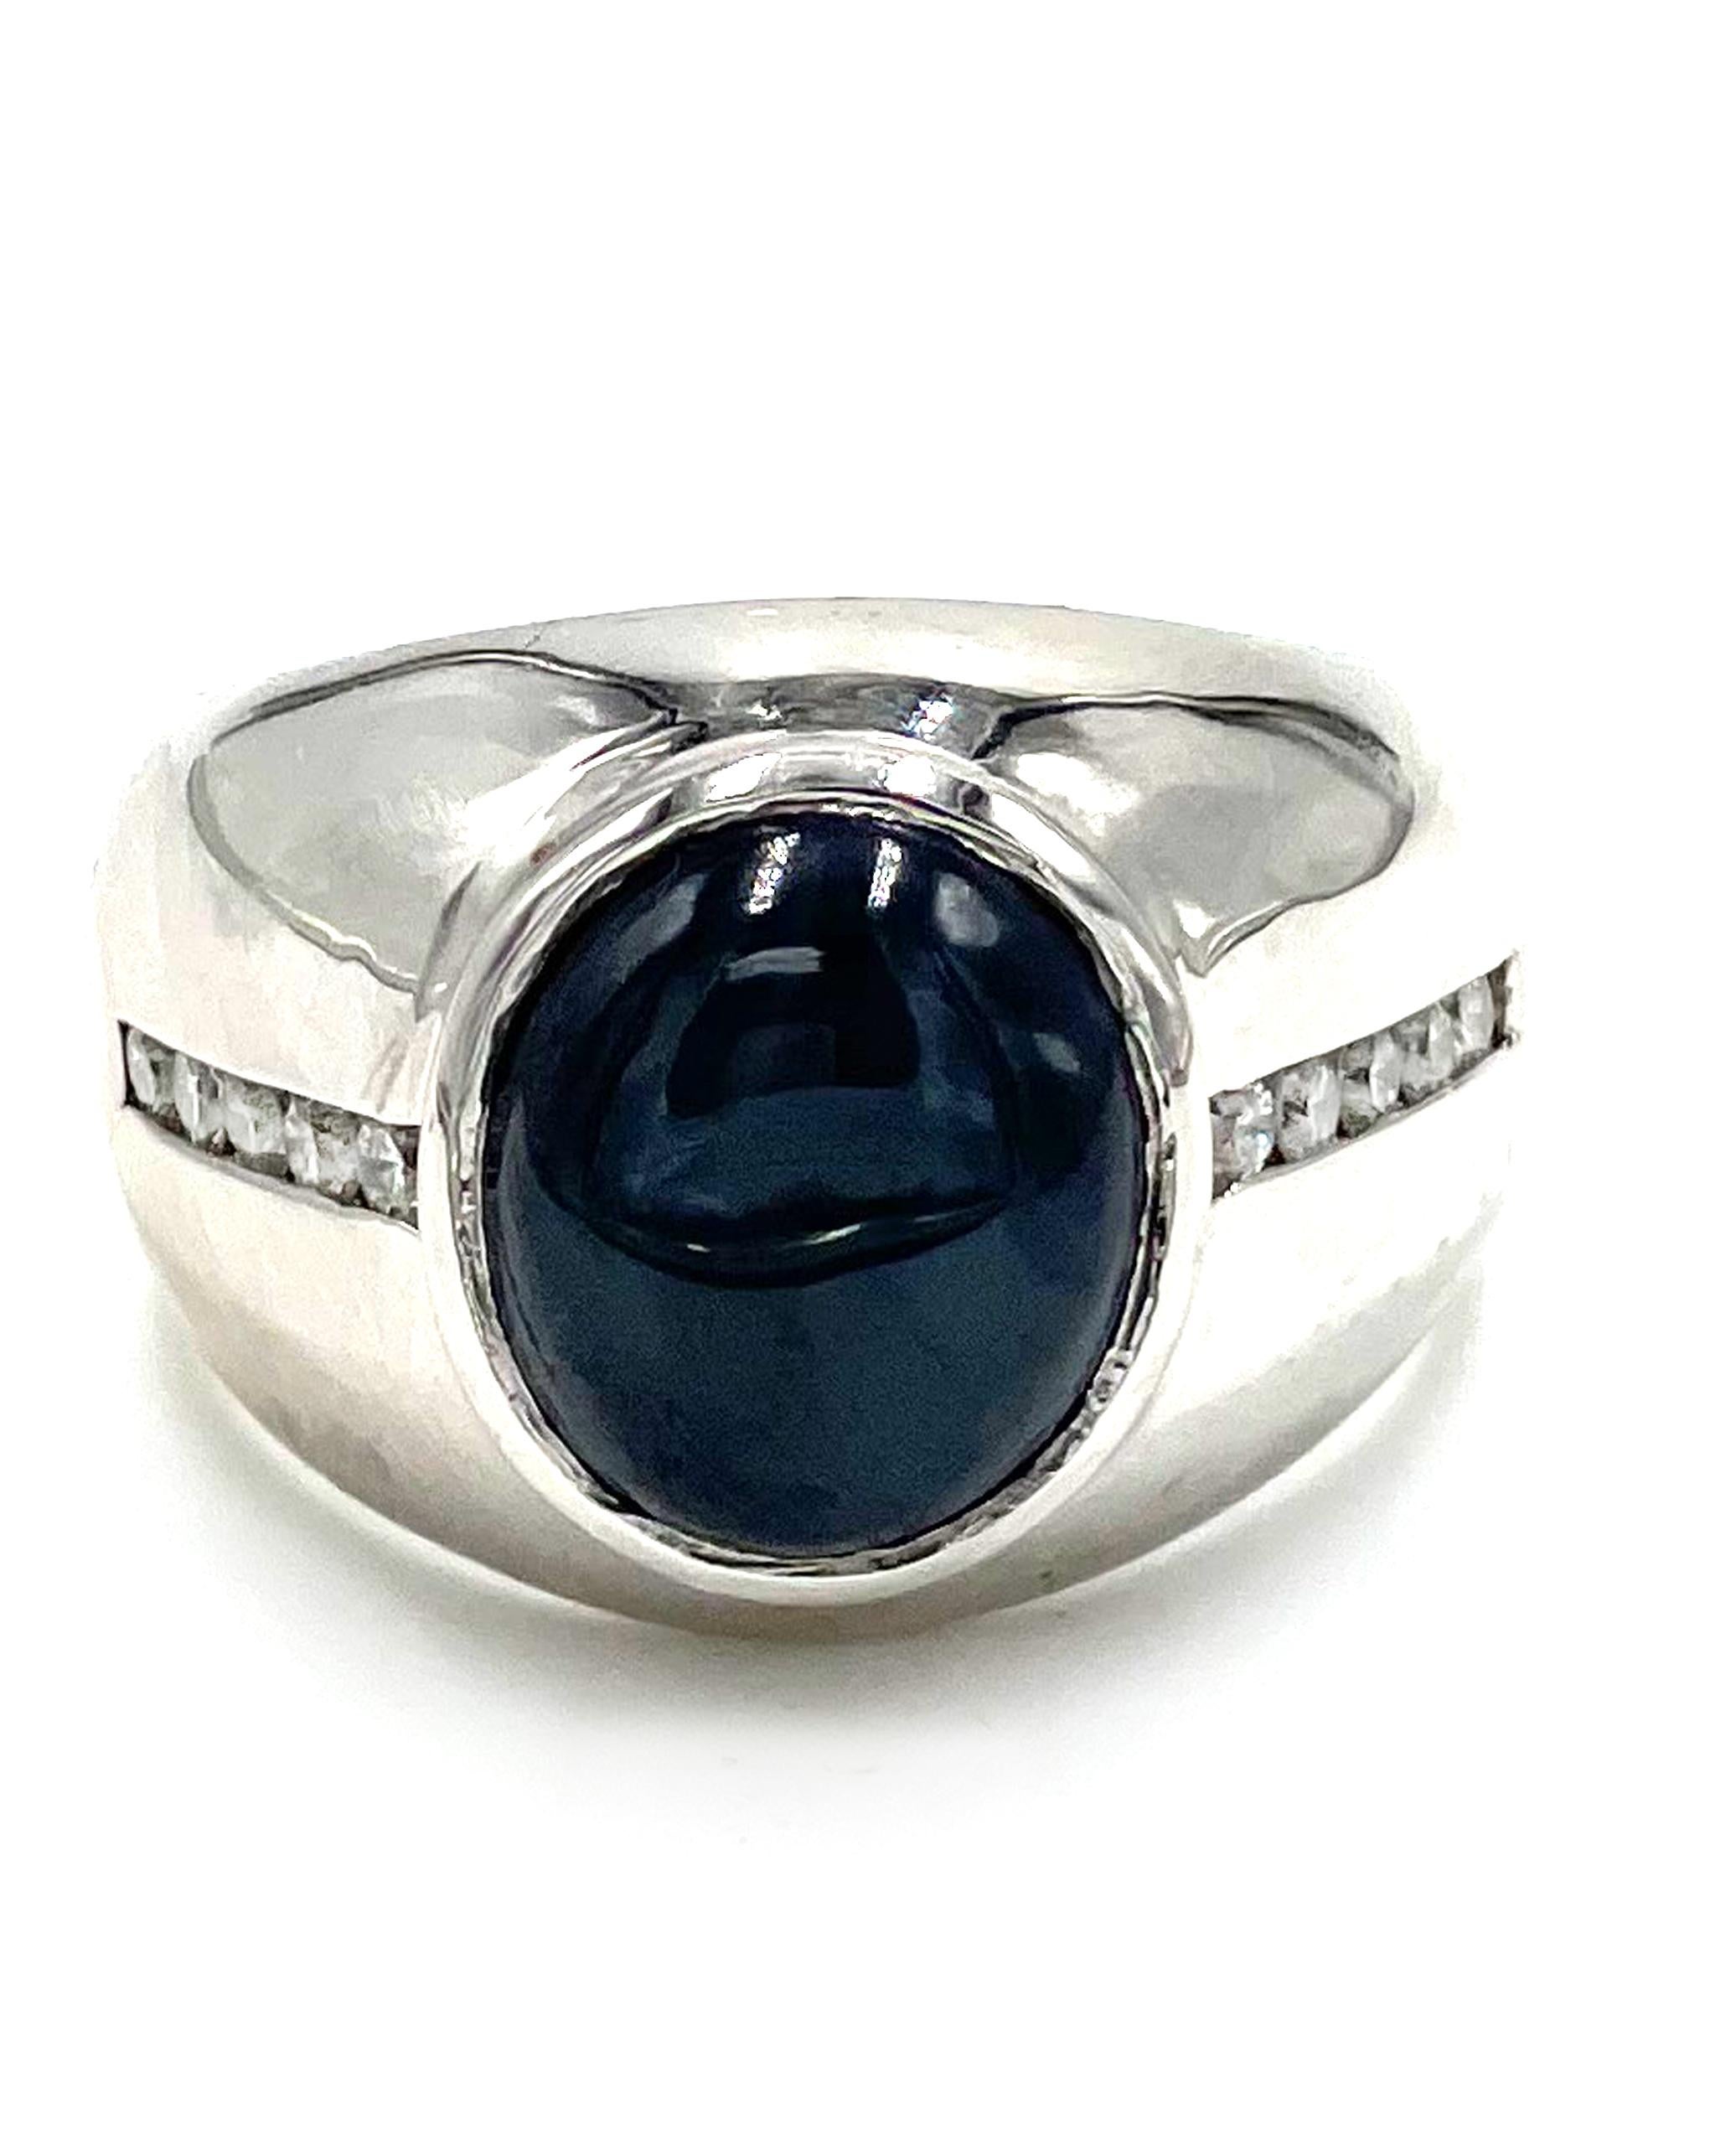 14K white gold men's ring with 10 round brilliant-cut diamonds 0.40 carat total weight and one oval shape cabochon cut star sapphire 8.50 carats.

* Finger size: 10.5
* Diamonds are G color, SI clarity.
* Top measures 7.36mm wide and tapers down to